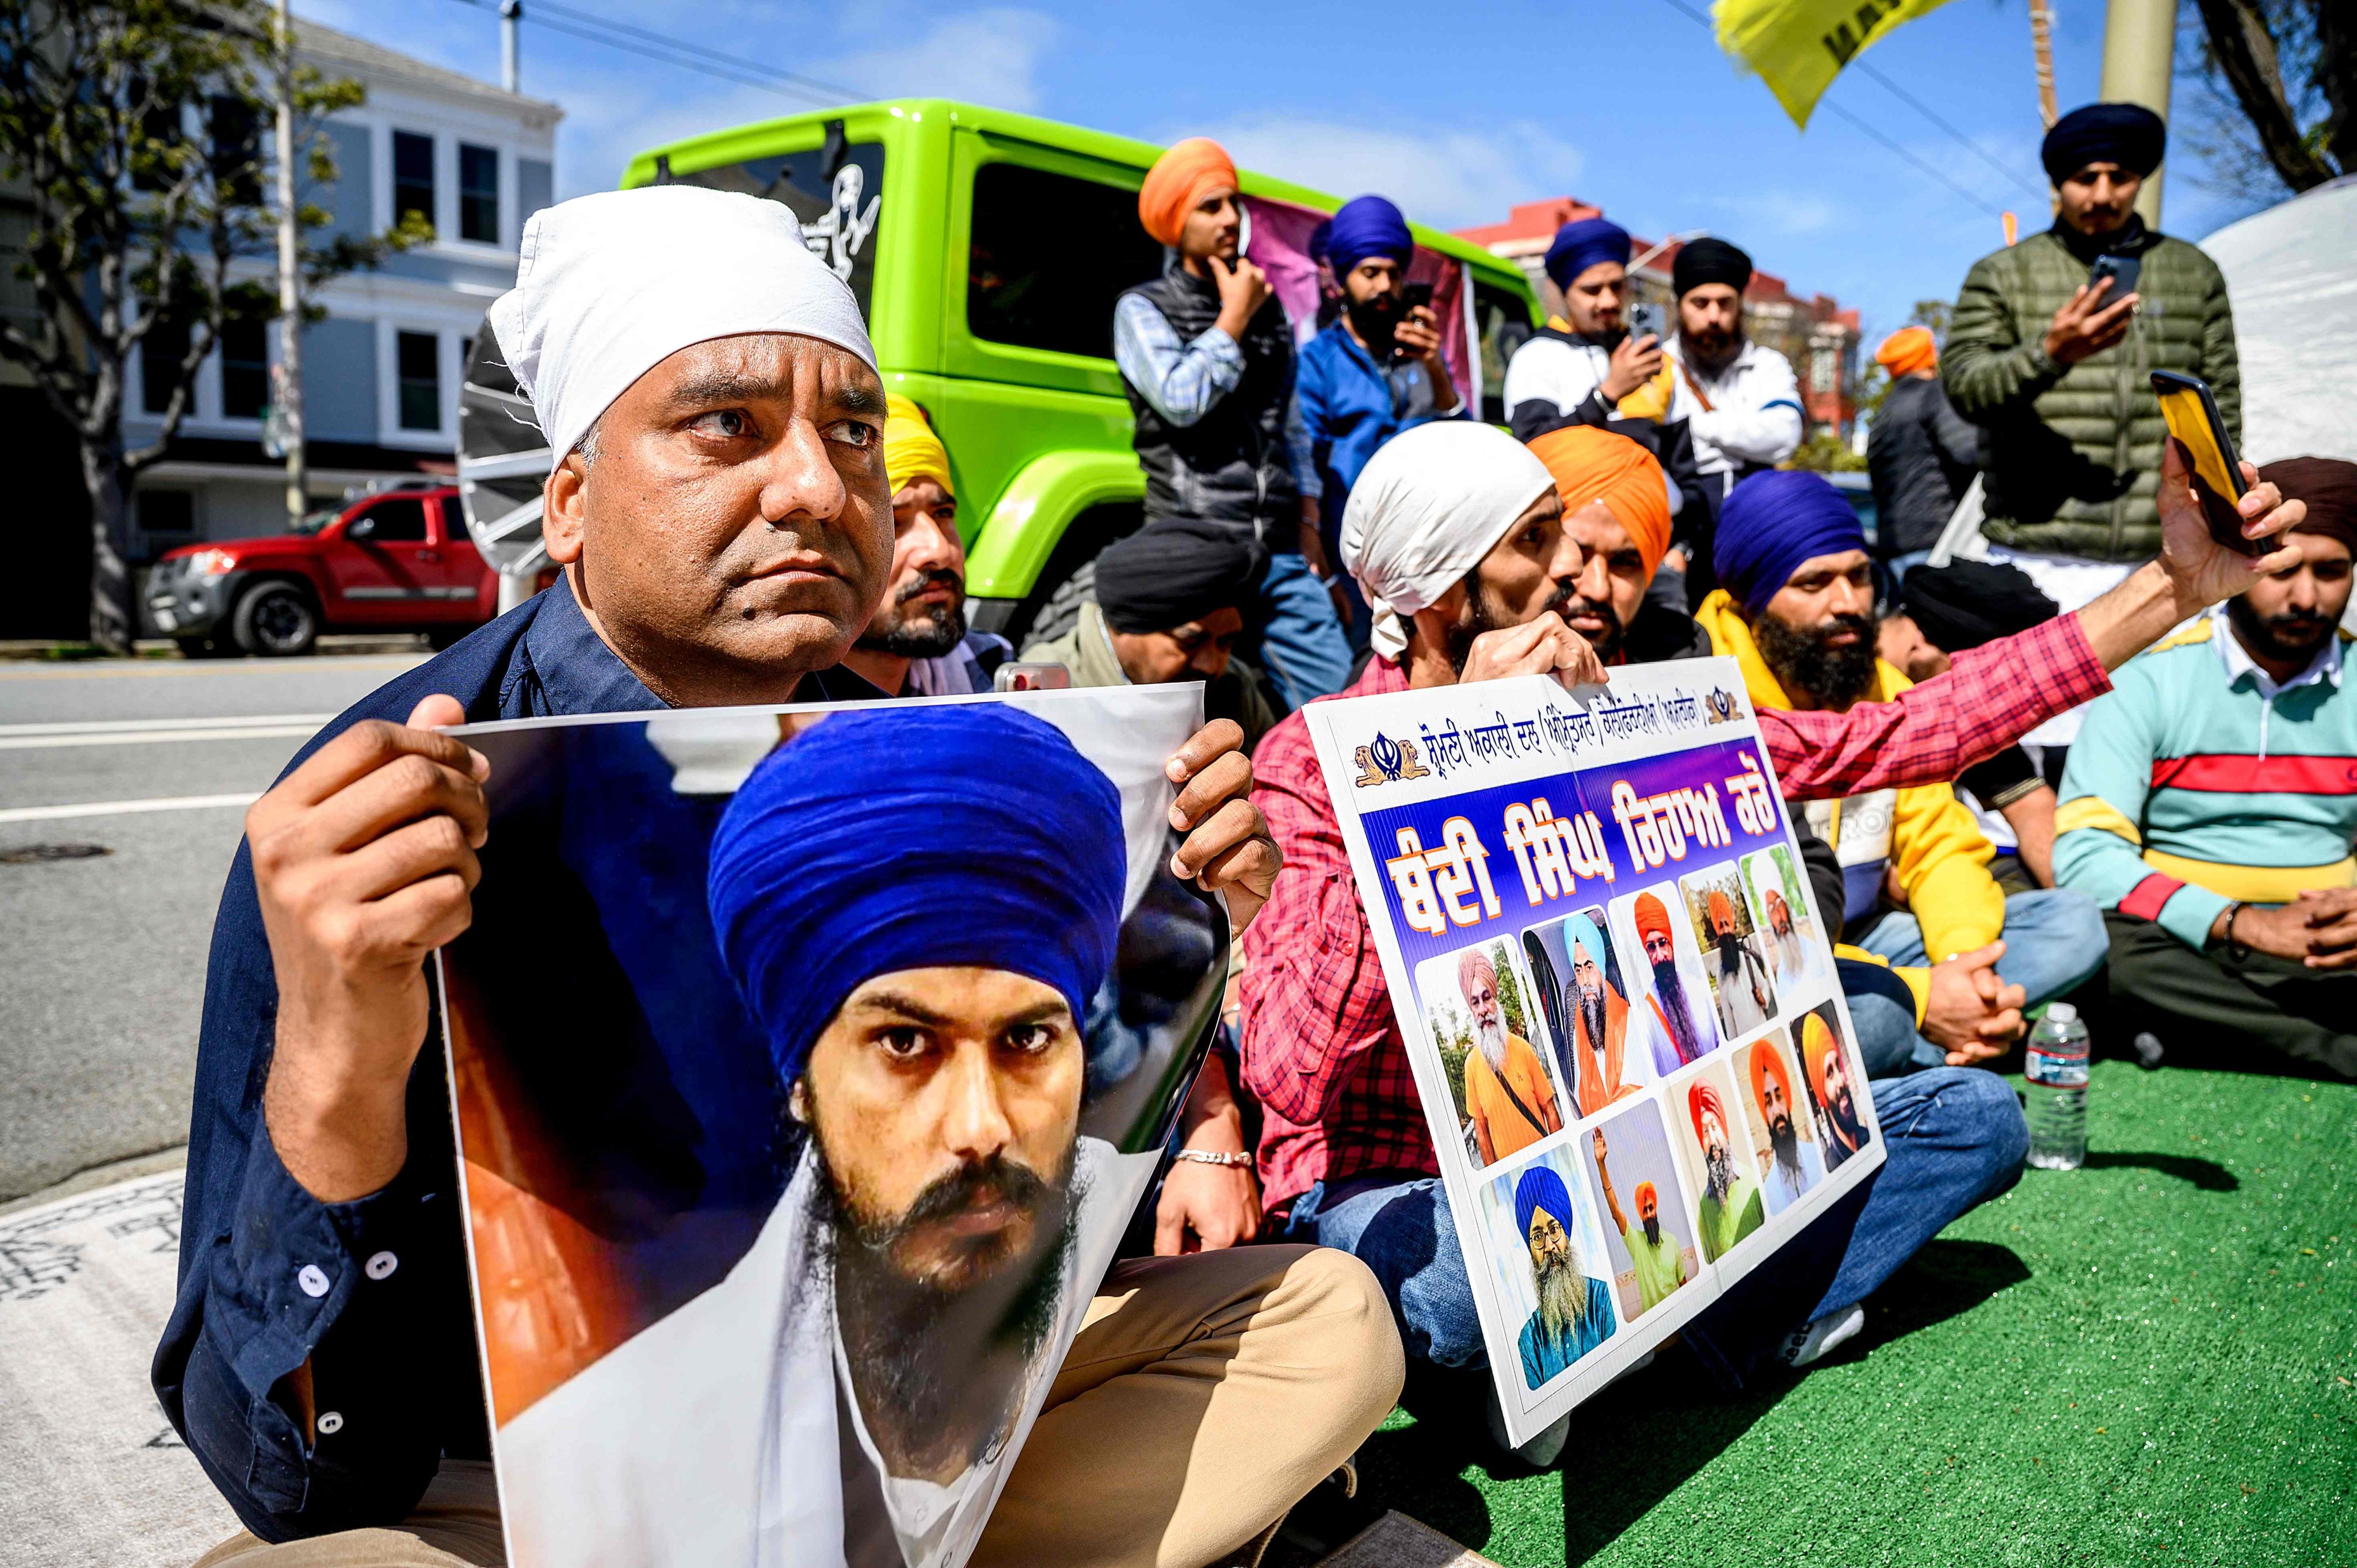 Demonstrators hold a photo of Sikh organiser Amritpal Singh while protesting against the Indian government outside the Indian consulate in San Francisco on March 20, 2023. Photo: AFP